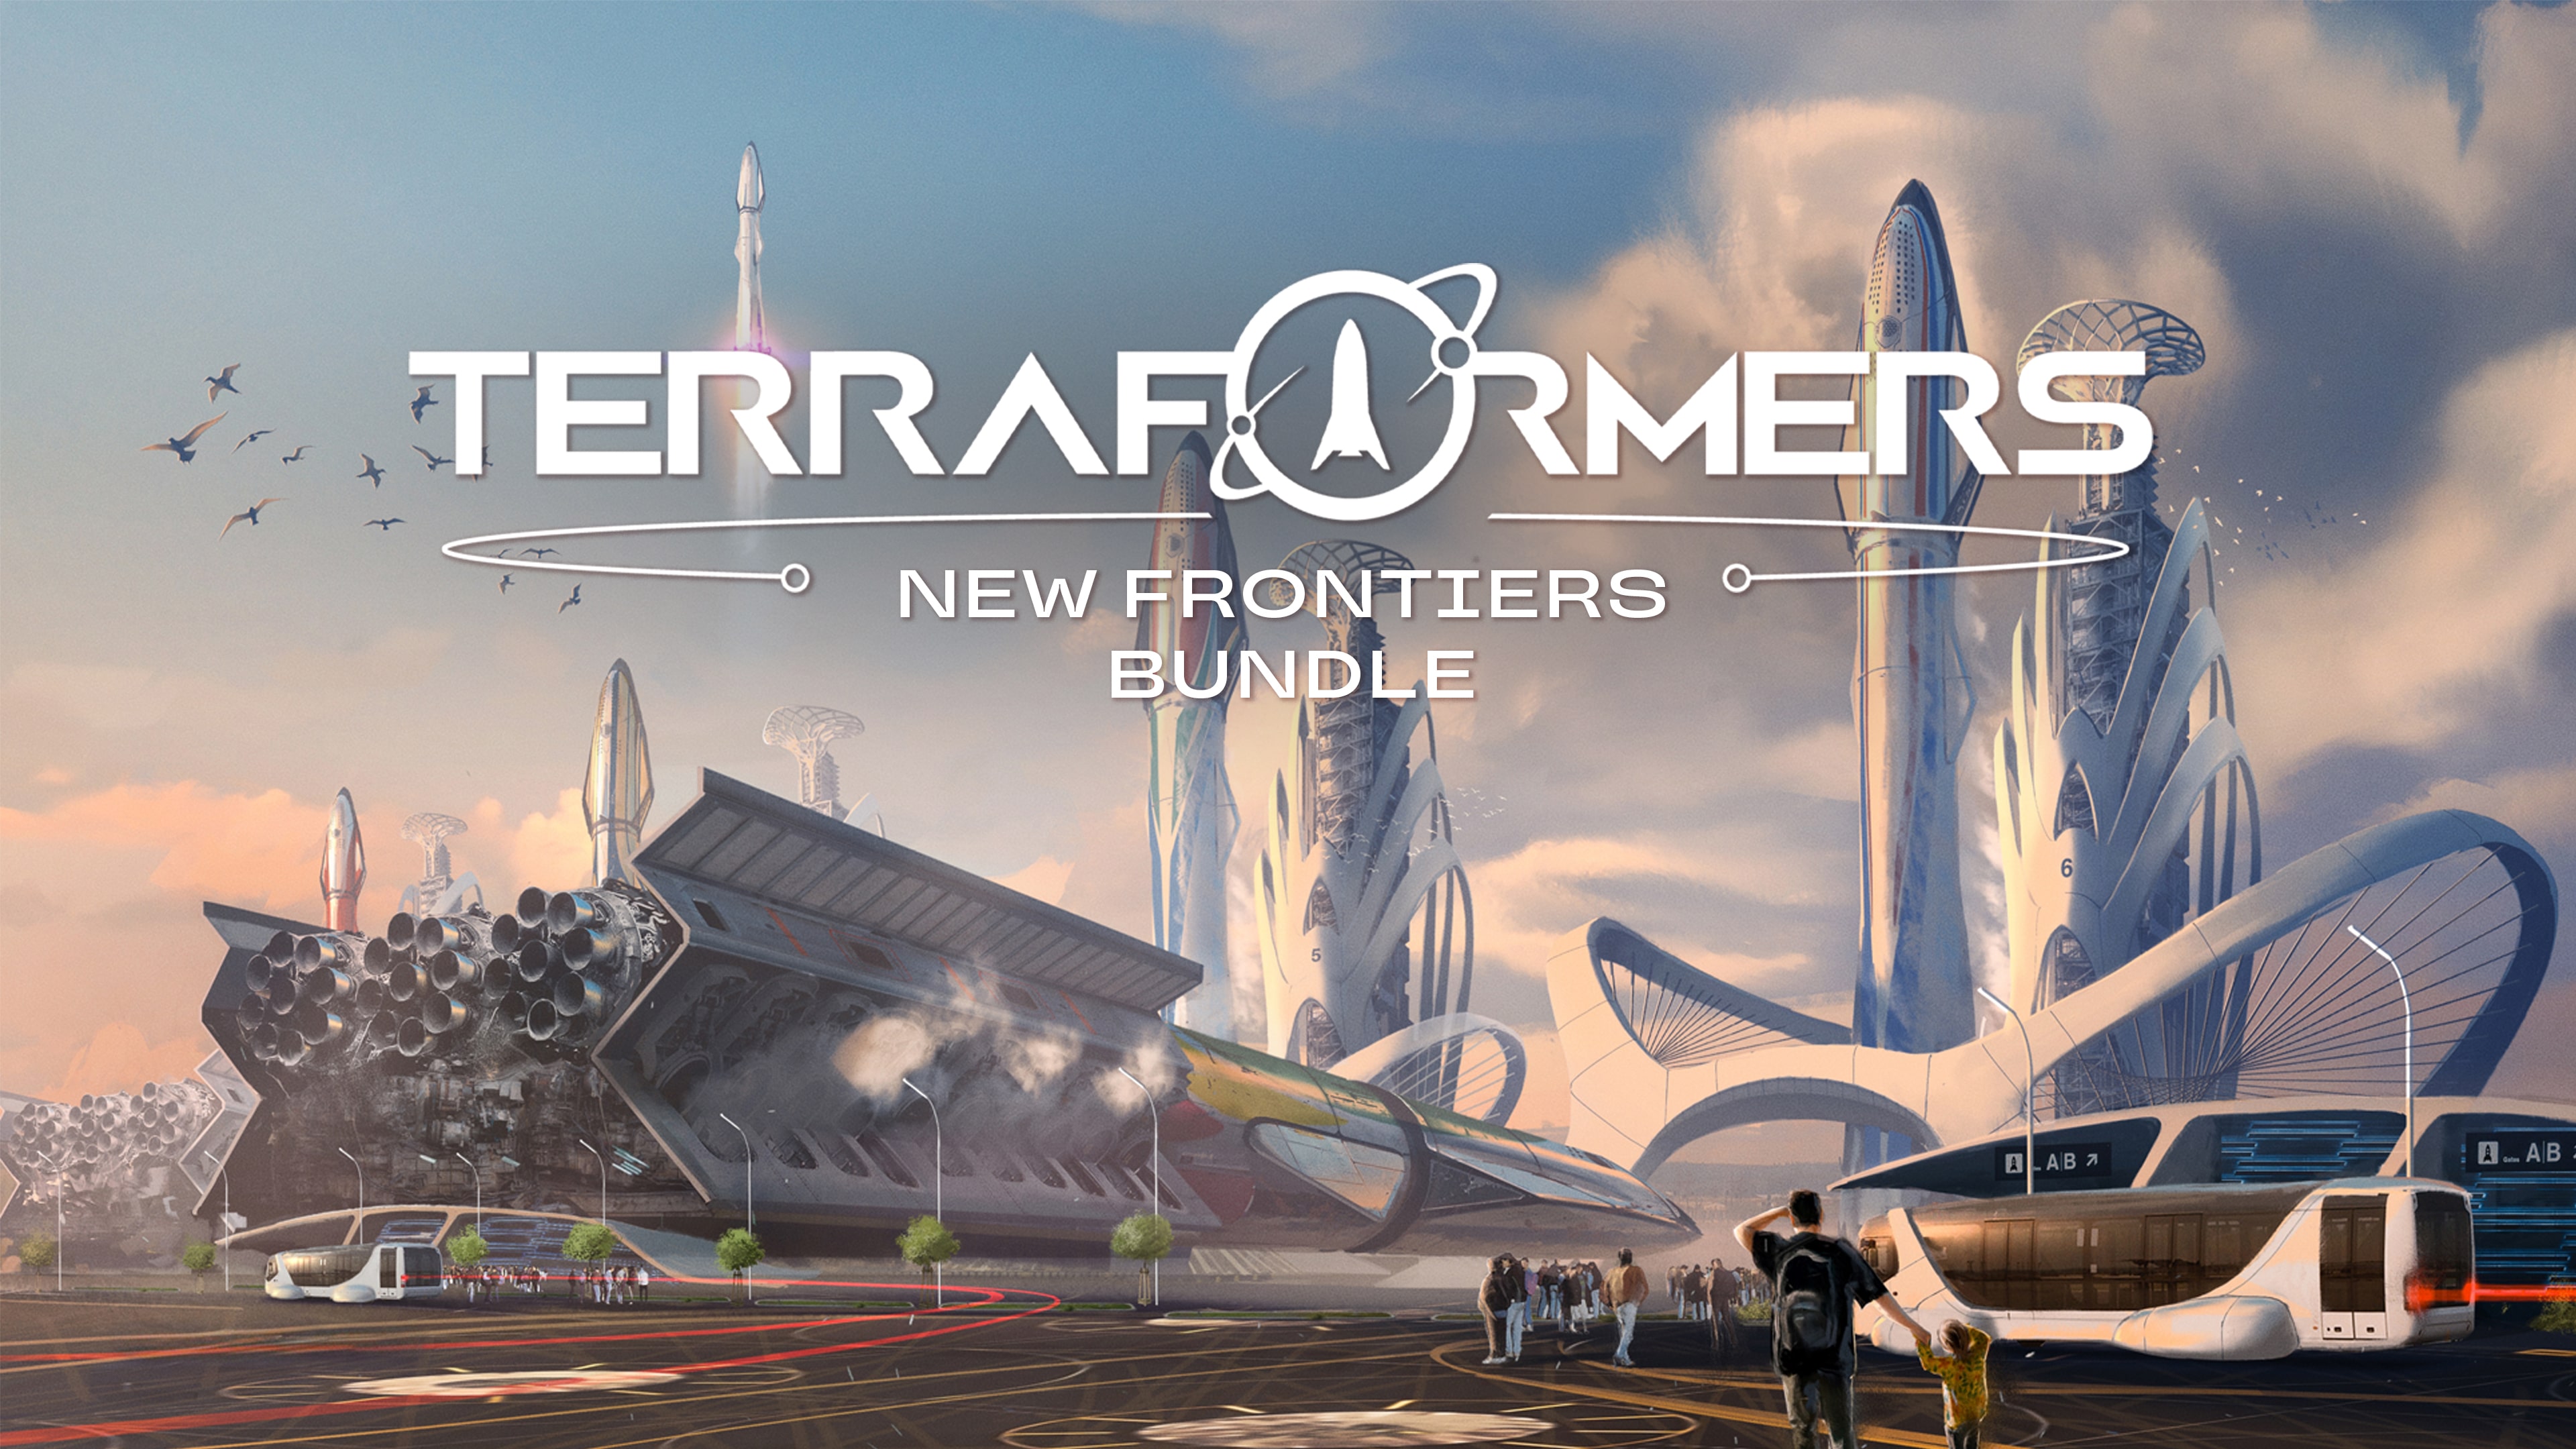 Terraformers: New Frontiers Bundle (Simplified Chinese, English, Korean, Japanese, Traditional Chinese)